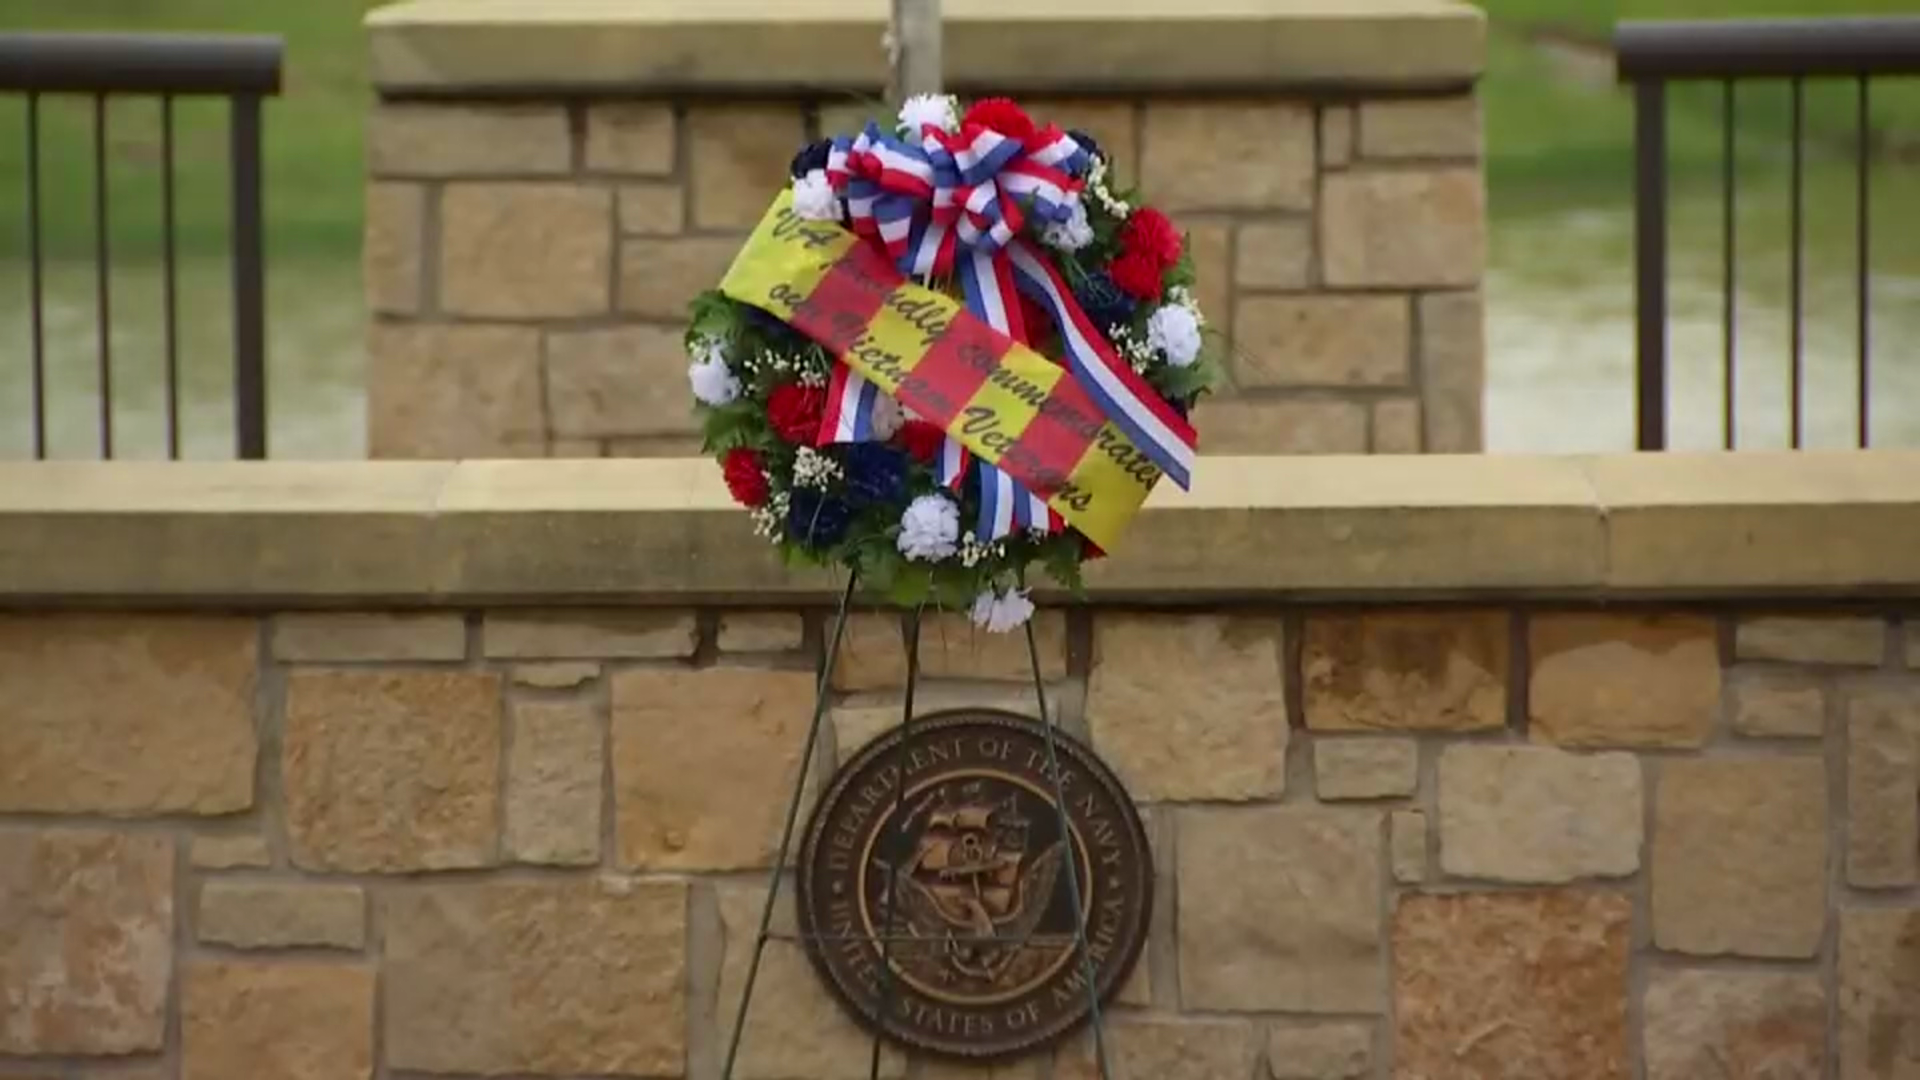 DFW National Cemetery Ceremony Honors Vietnam Veterans and Their Families